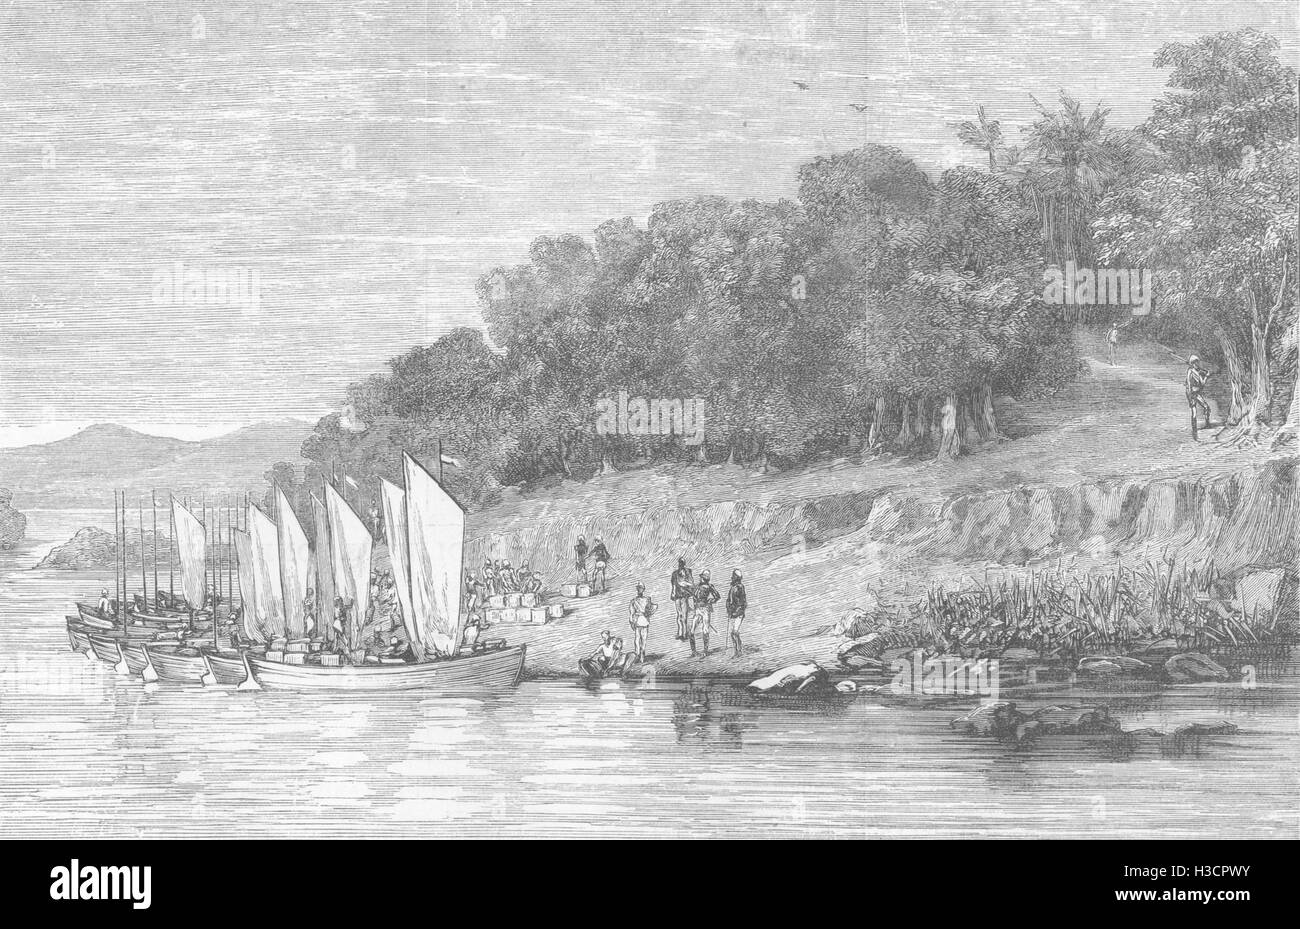 SUDAN War General Earle's Landing-place at Hamdab,on the Nile 1885. The Illustrated London News Stock Photo